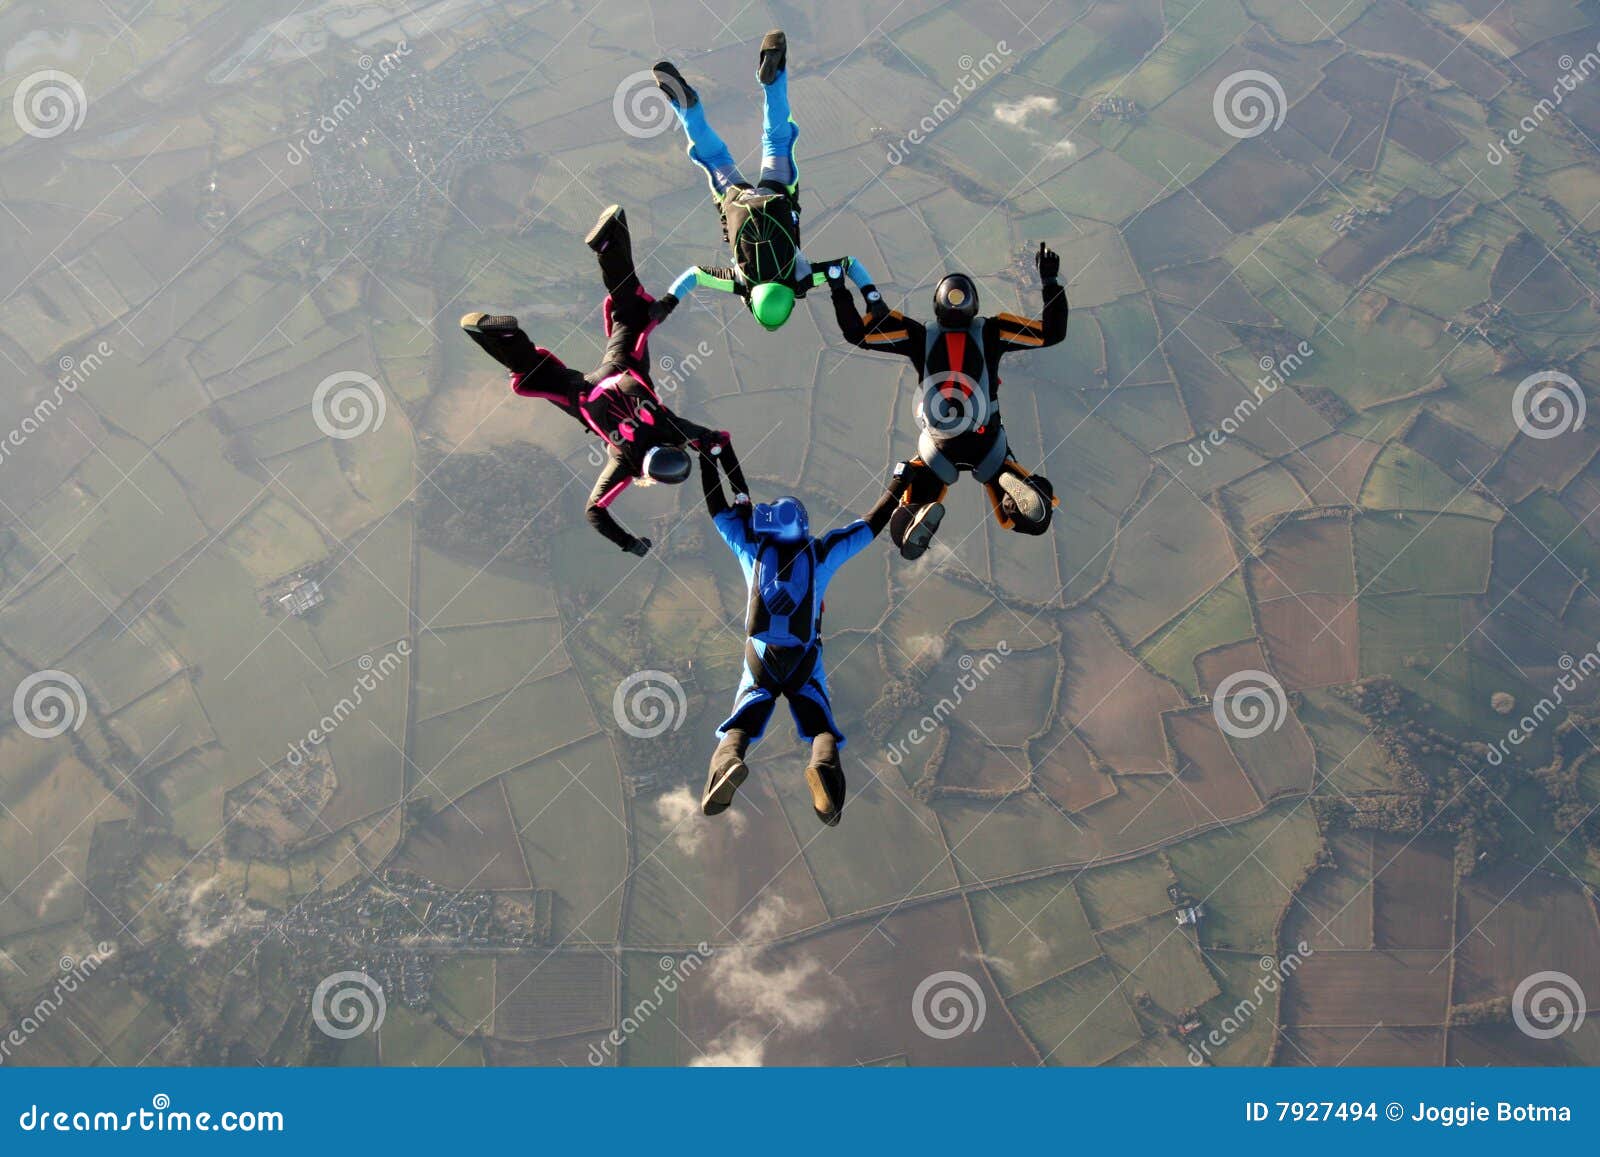 four skydivers doing formations